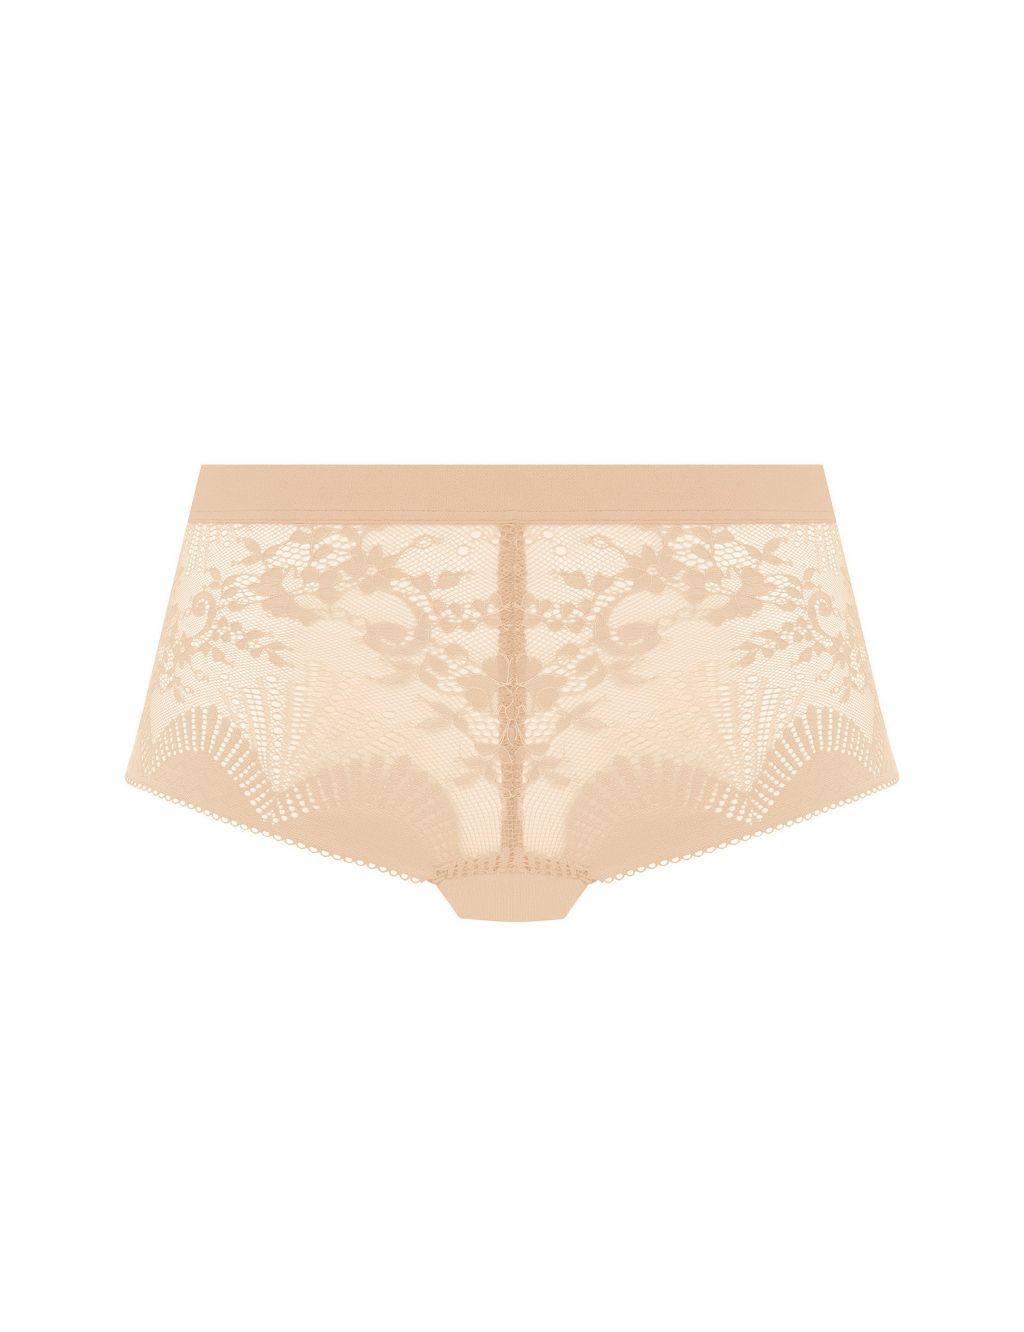 Lace High Rise Knicker Shorts 1 of 6